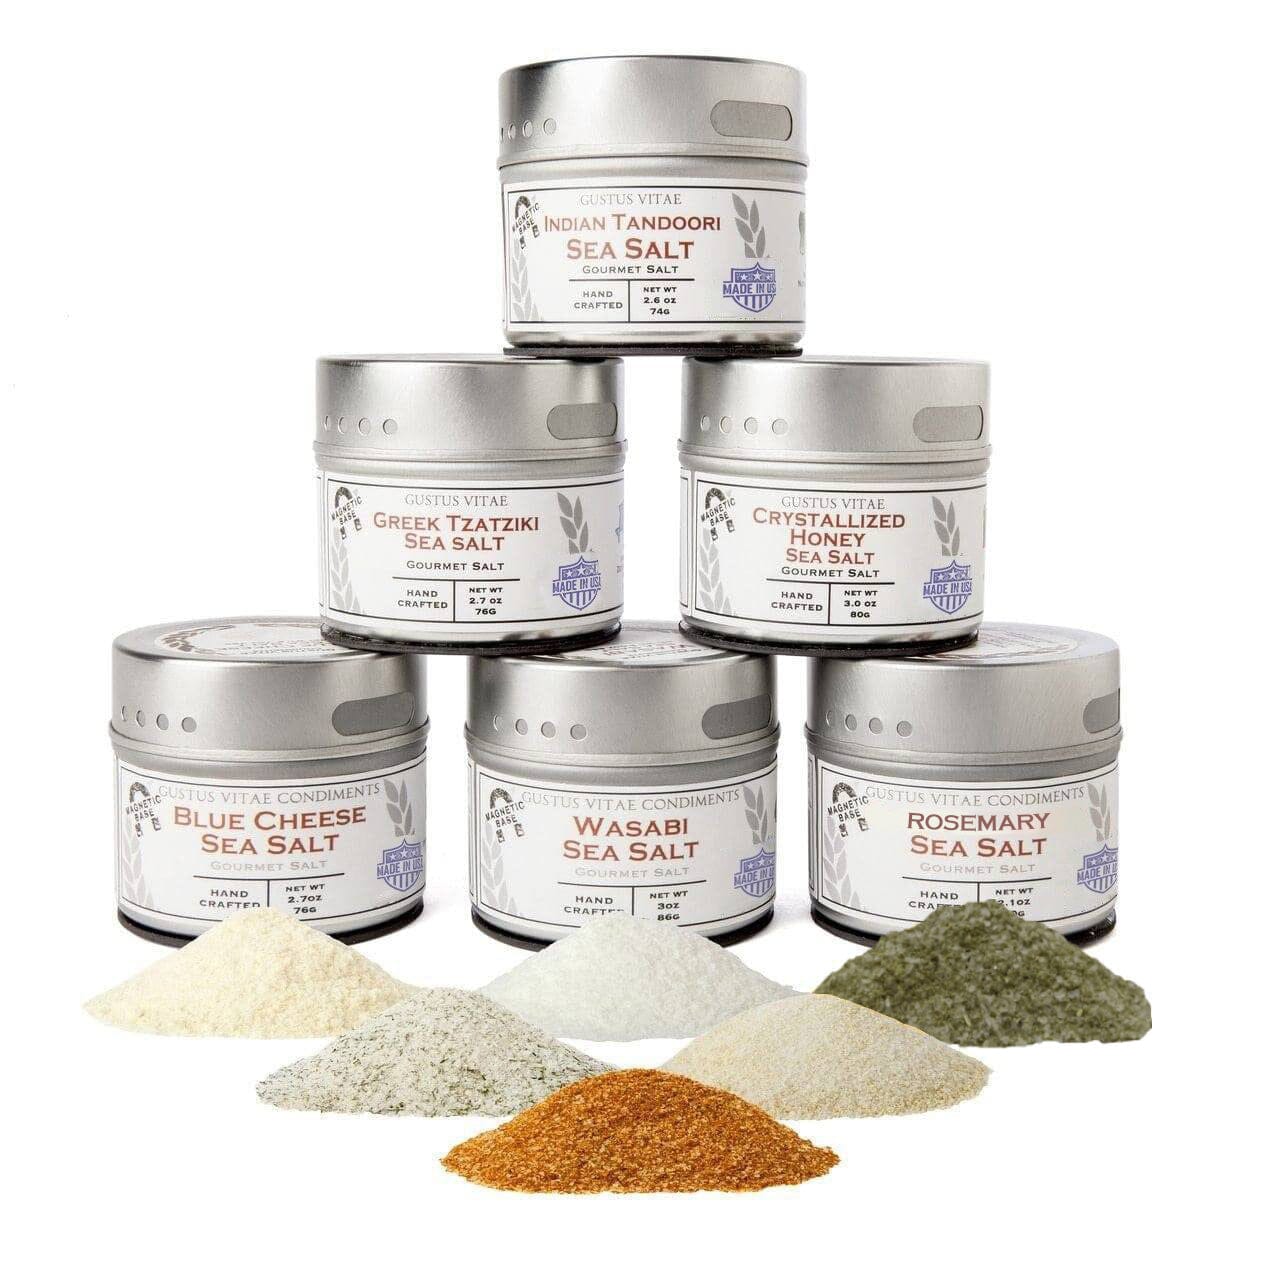 Chef's Secret Finishing Sea Salts Collection - 6 Tins by Gustus Vitae